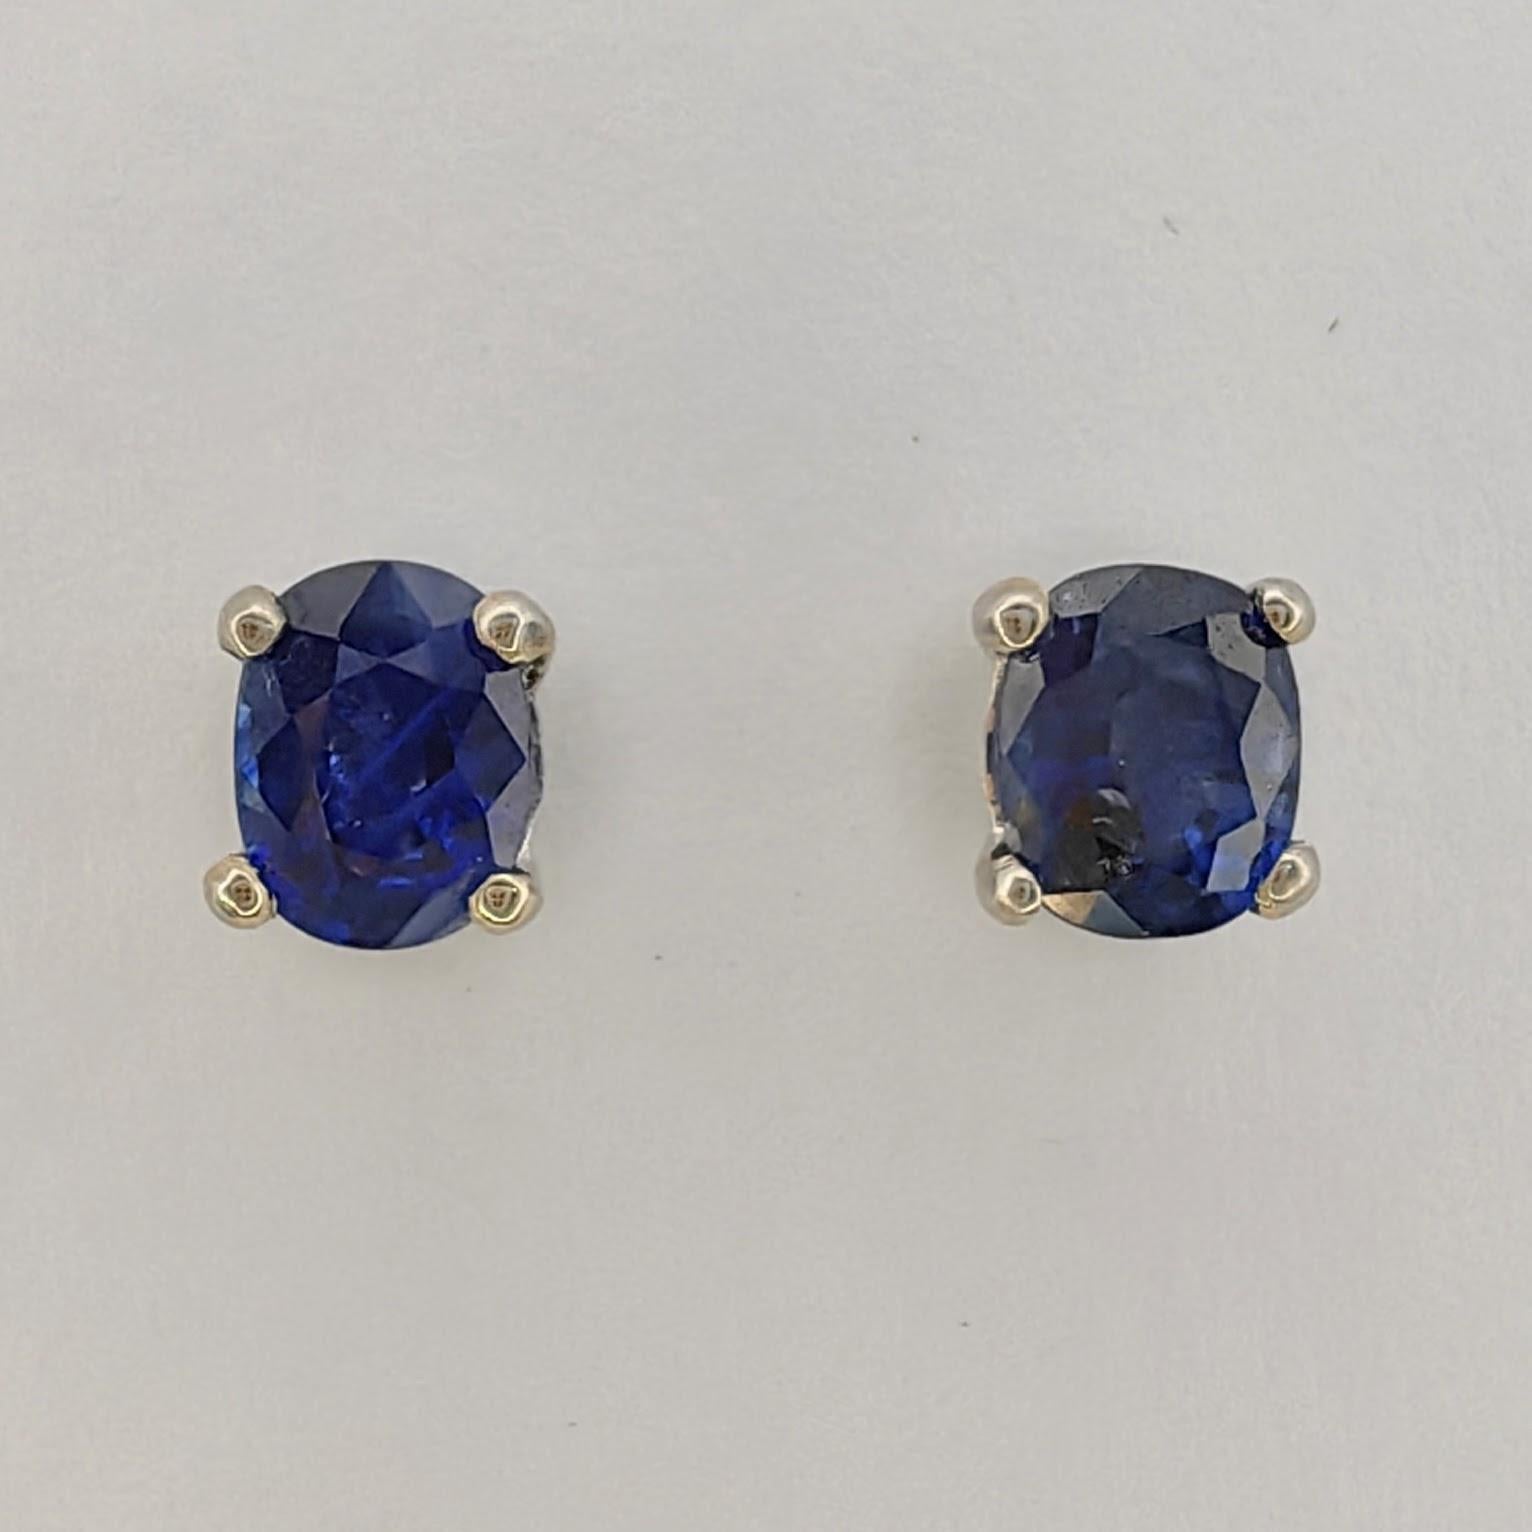 Introducing our 1.04 Carat Oval-cut Sapphire Four Prong Stud Earrings in 18K White Gold, an essential addition to your jewelry collection.

These exquisite earrings feature two oval-cut sapphires, with a total weight of 1.04 carats. Their deep and